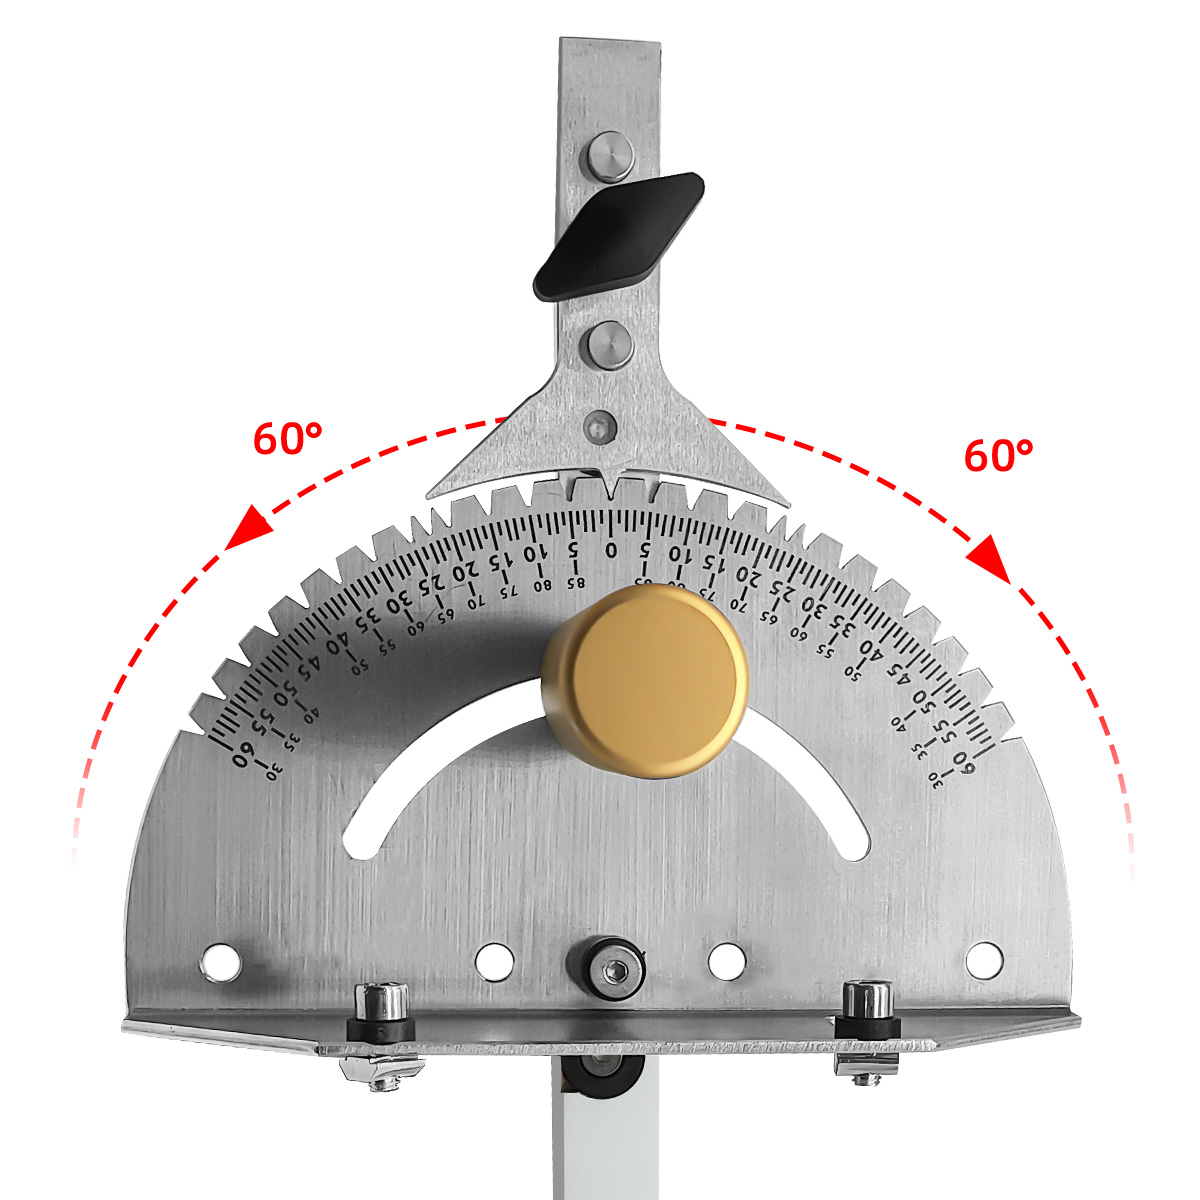 Precision Miter Gauge W/ A Standard Slot -Universal Table Saw Miter Gauge High Accuracy Miter Saw Protractor with 27 Angle Stops